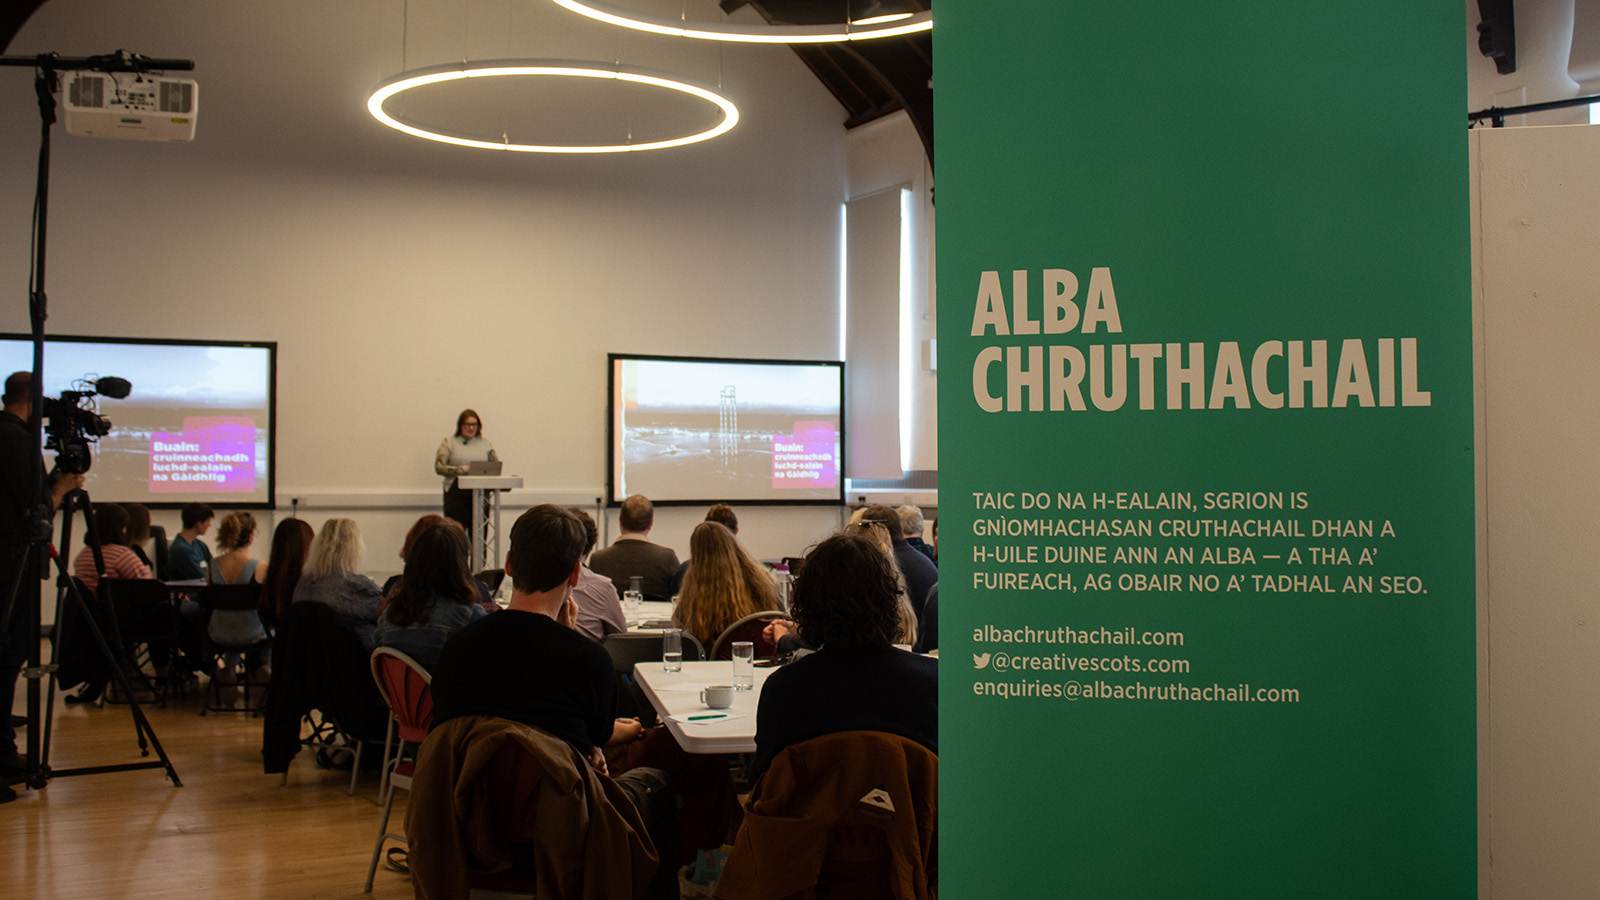 A sign in Gaelic in a room with tables and people speaking at a conference